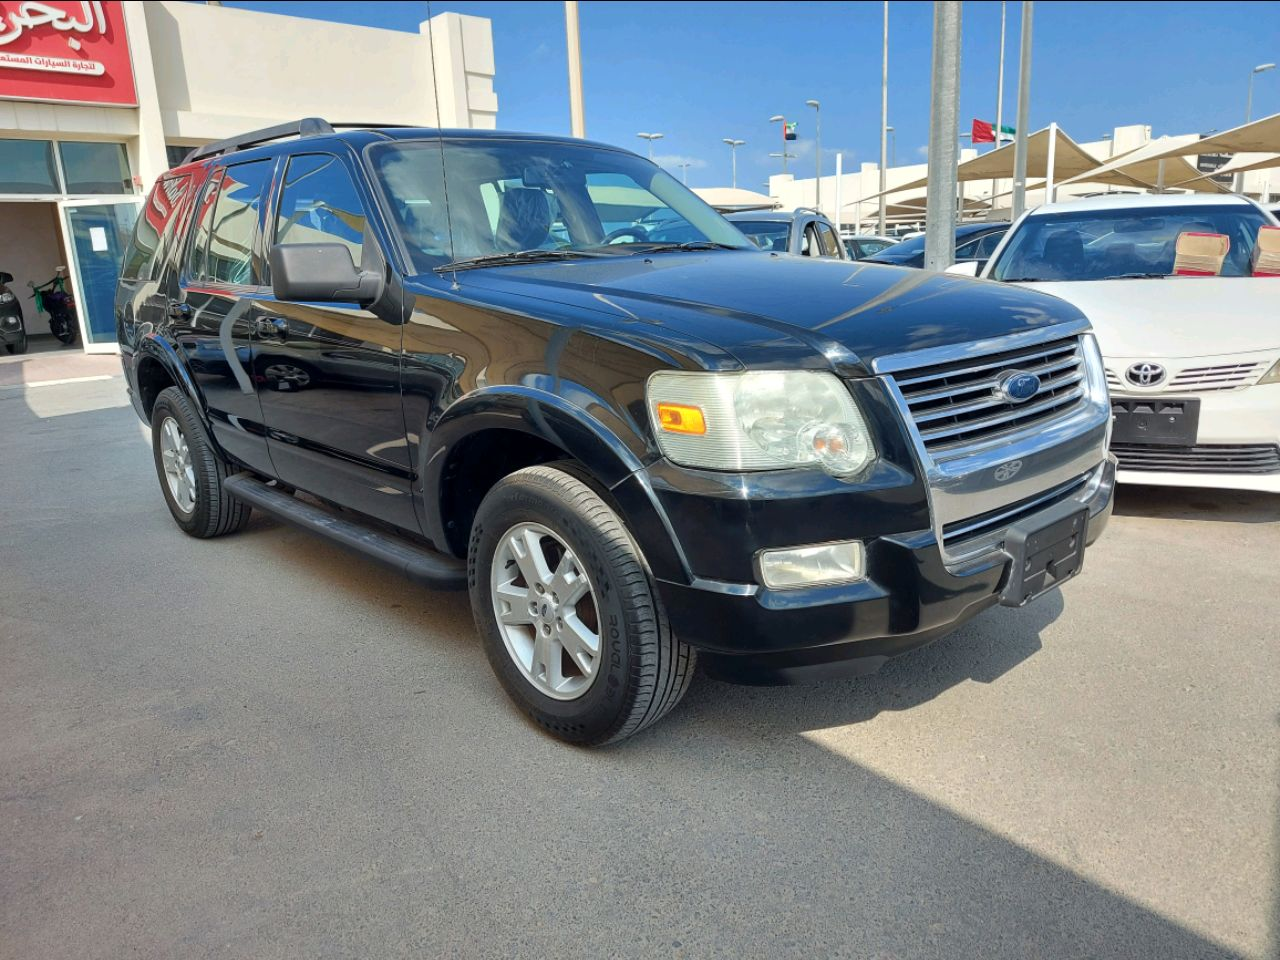 Ford Explorer 2010 AED 15,000, GCC Spec, Good condition, Full Option, Lady Use, Navigation System, Fog Lights, Negotiable, Full Se